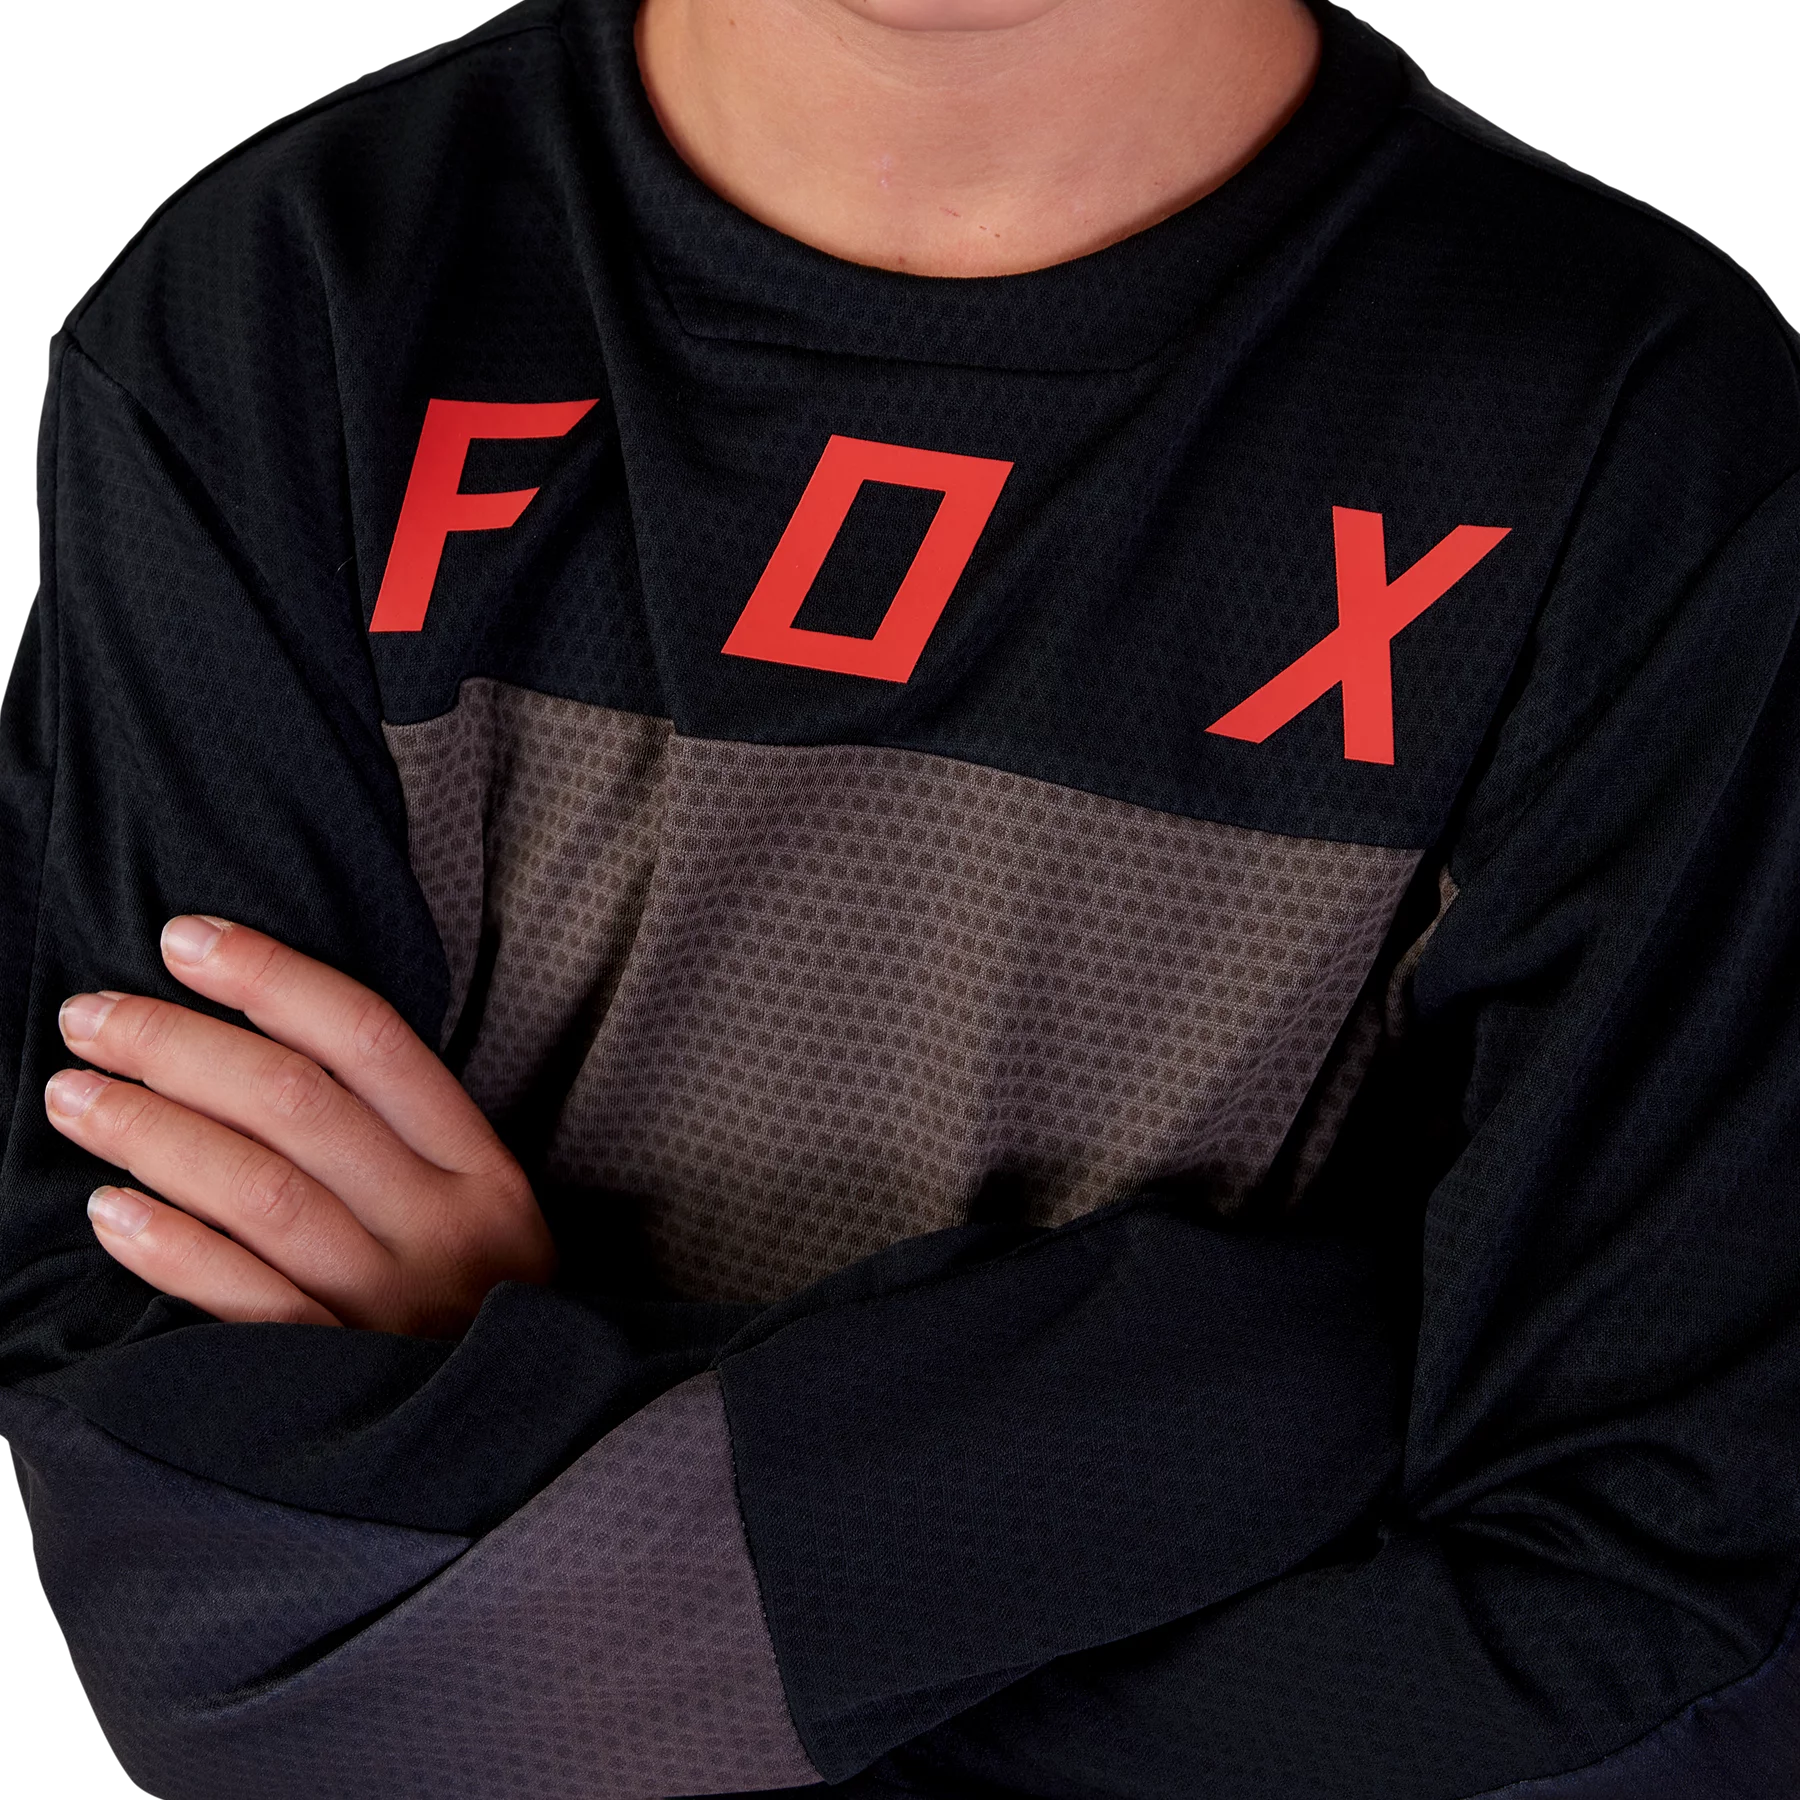 Fox Racing Youth Defend Race Jersey LS